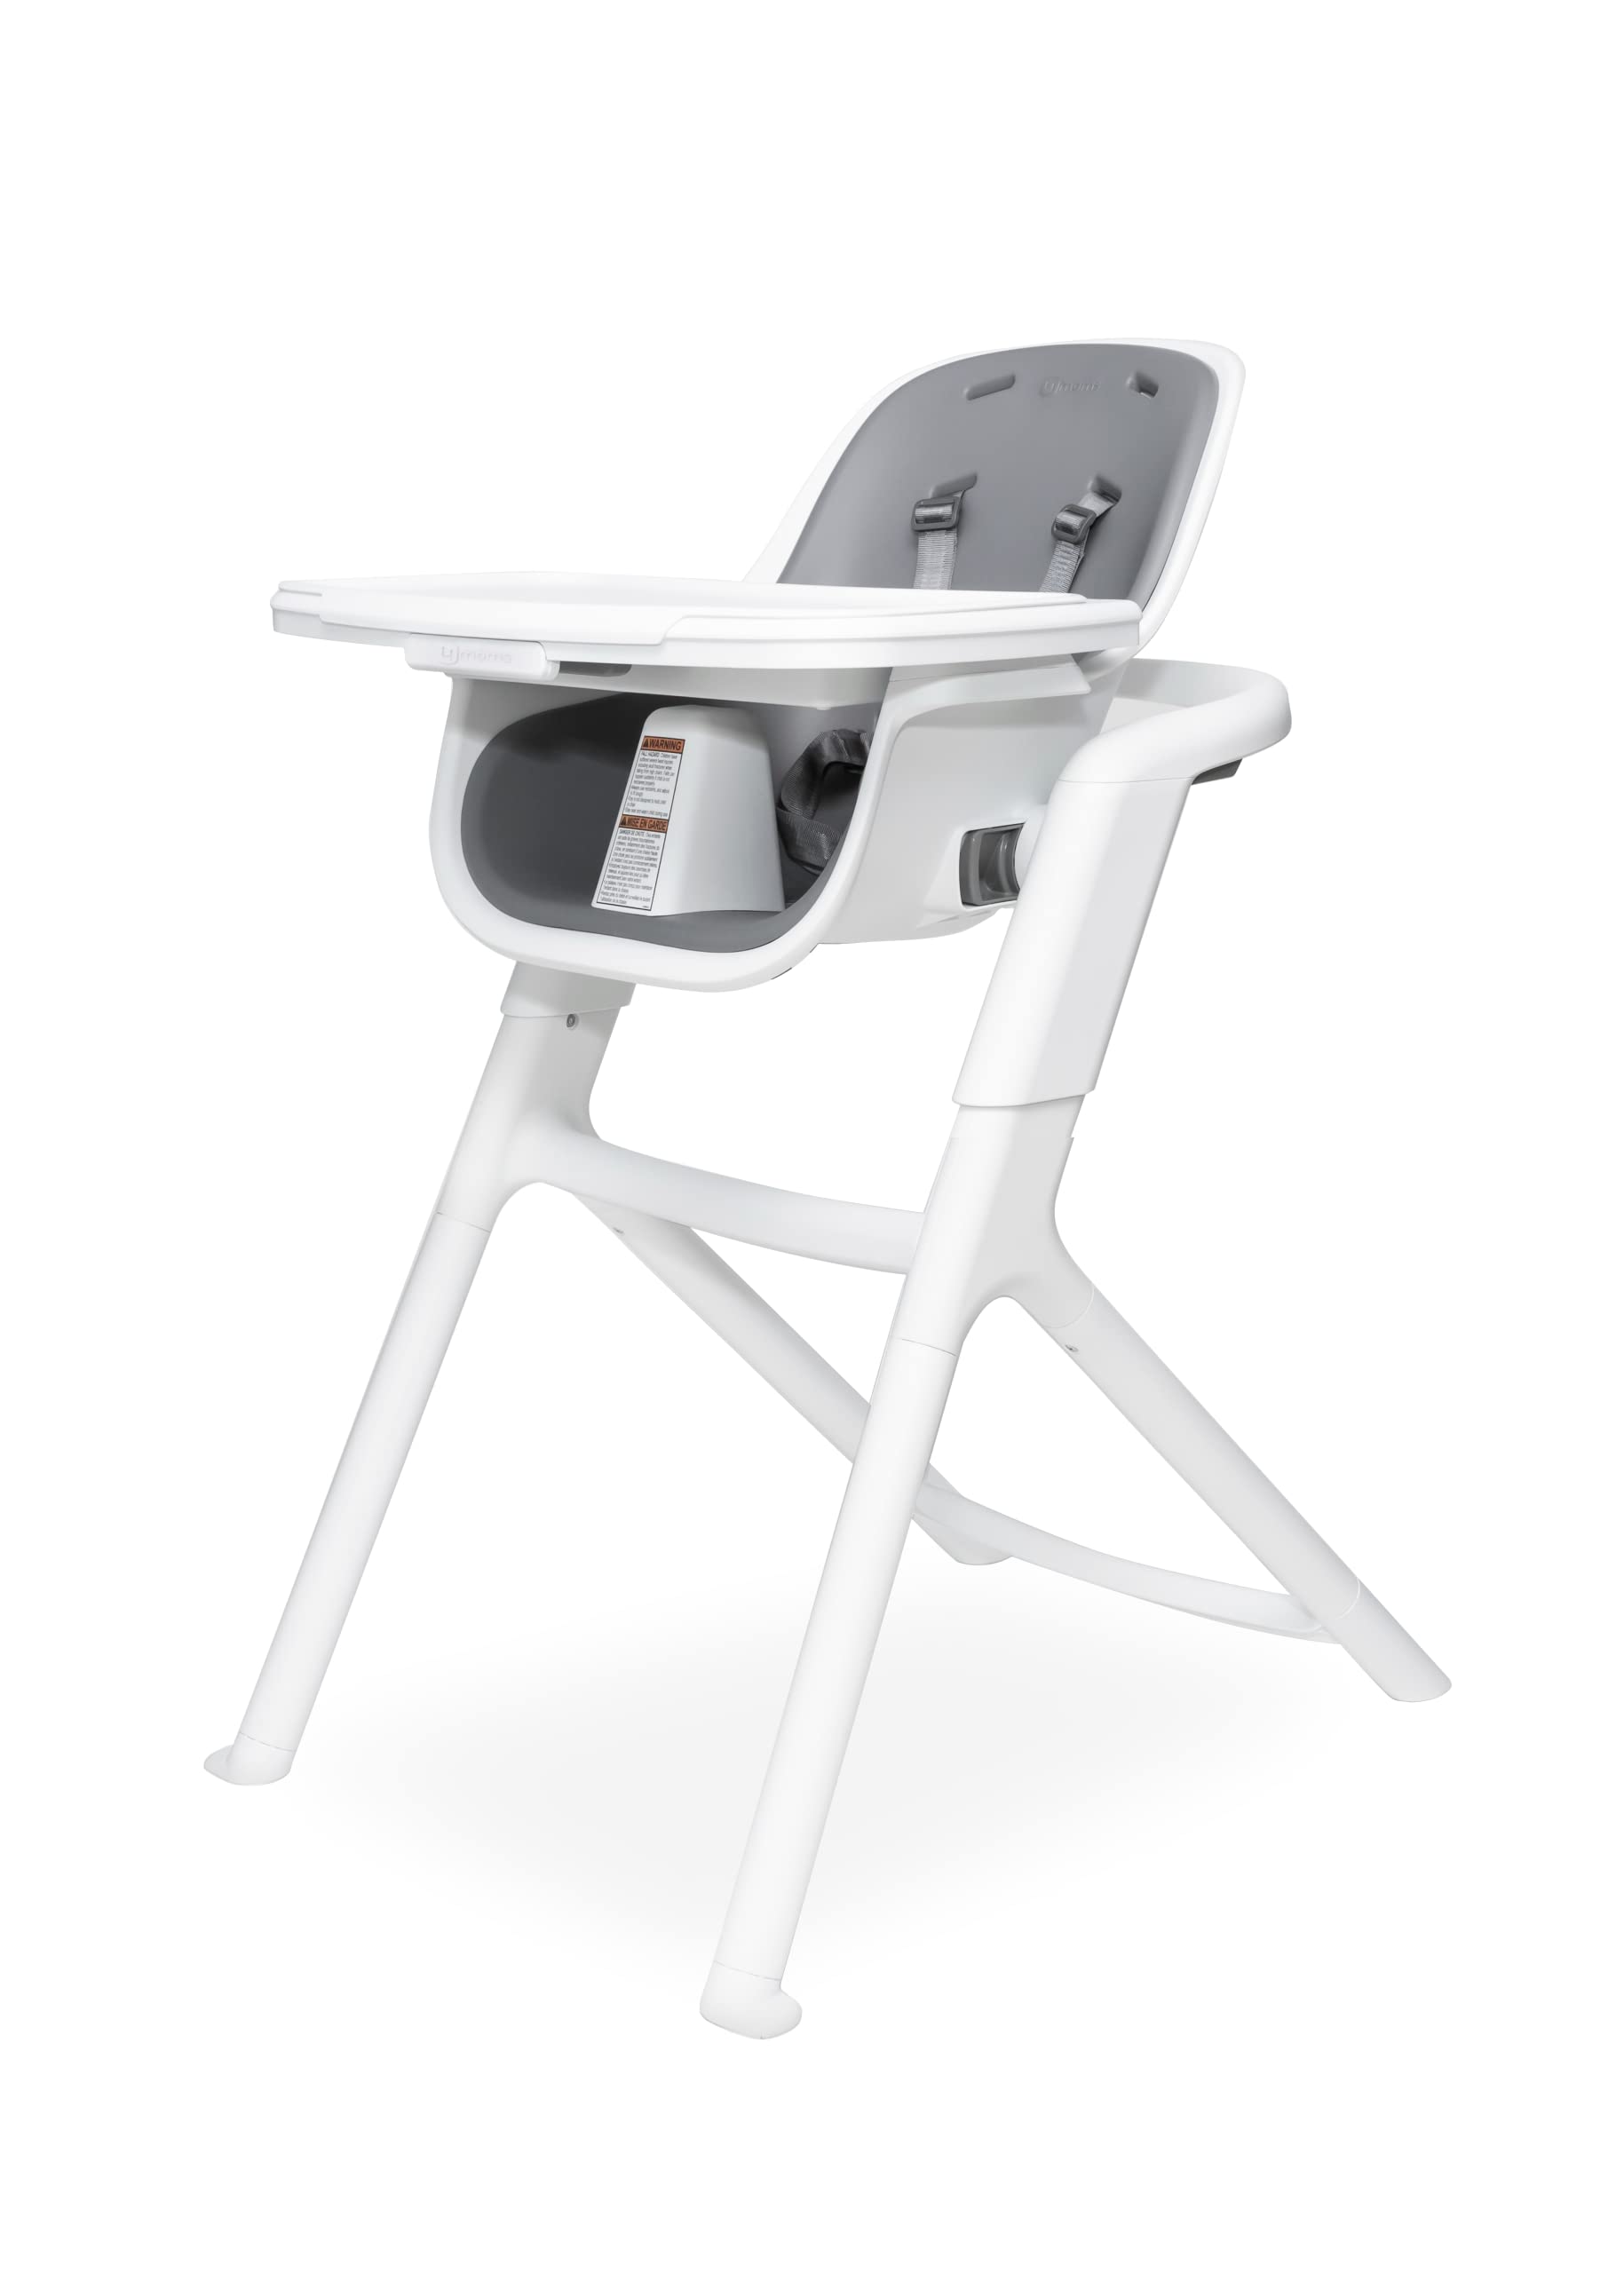 4moms Baby Connect High Chair w/ Magnetic Tray Attachment (White/Grey) $192 + Free Shipping